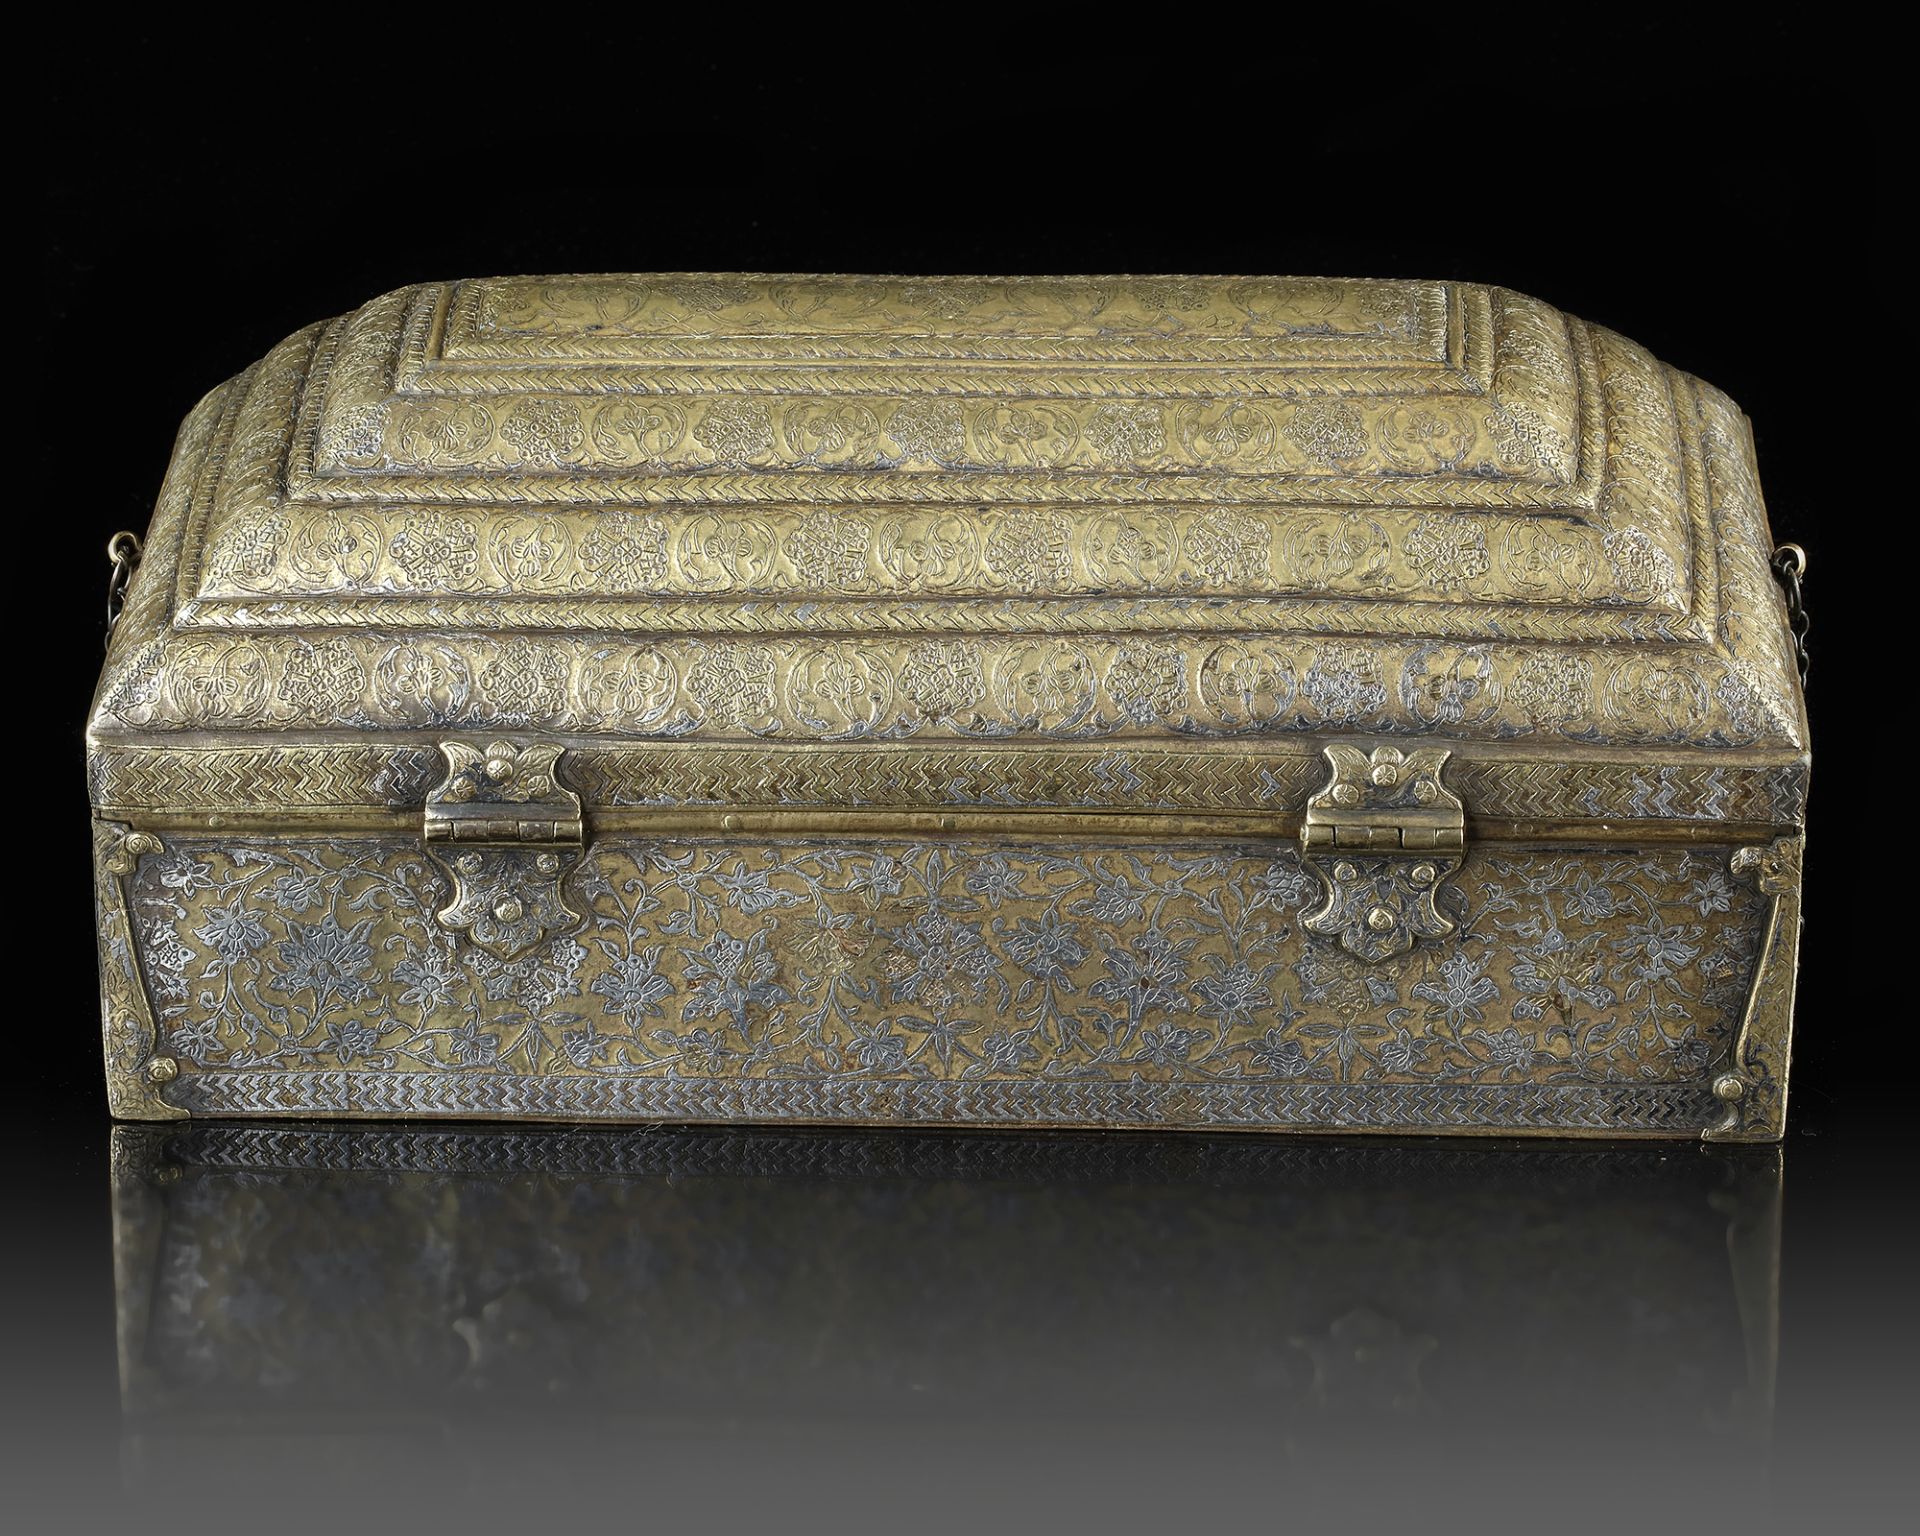 A SILVER INLAID BRASS SCRIBE'S WRITING BOX, DELHI SULTANATE INDIA, 15TH CENTURY - Image 6 of 6